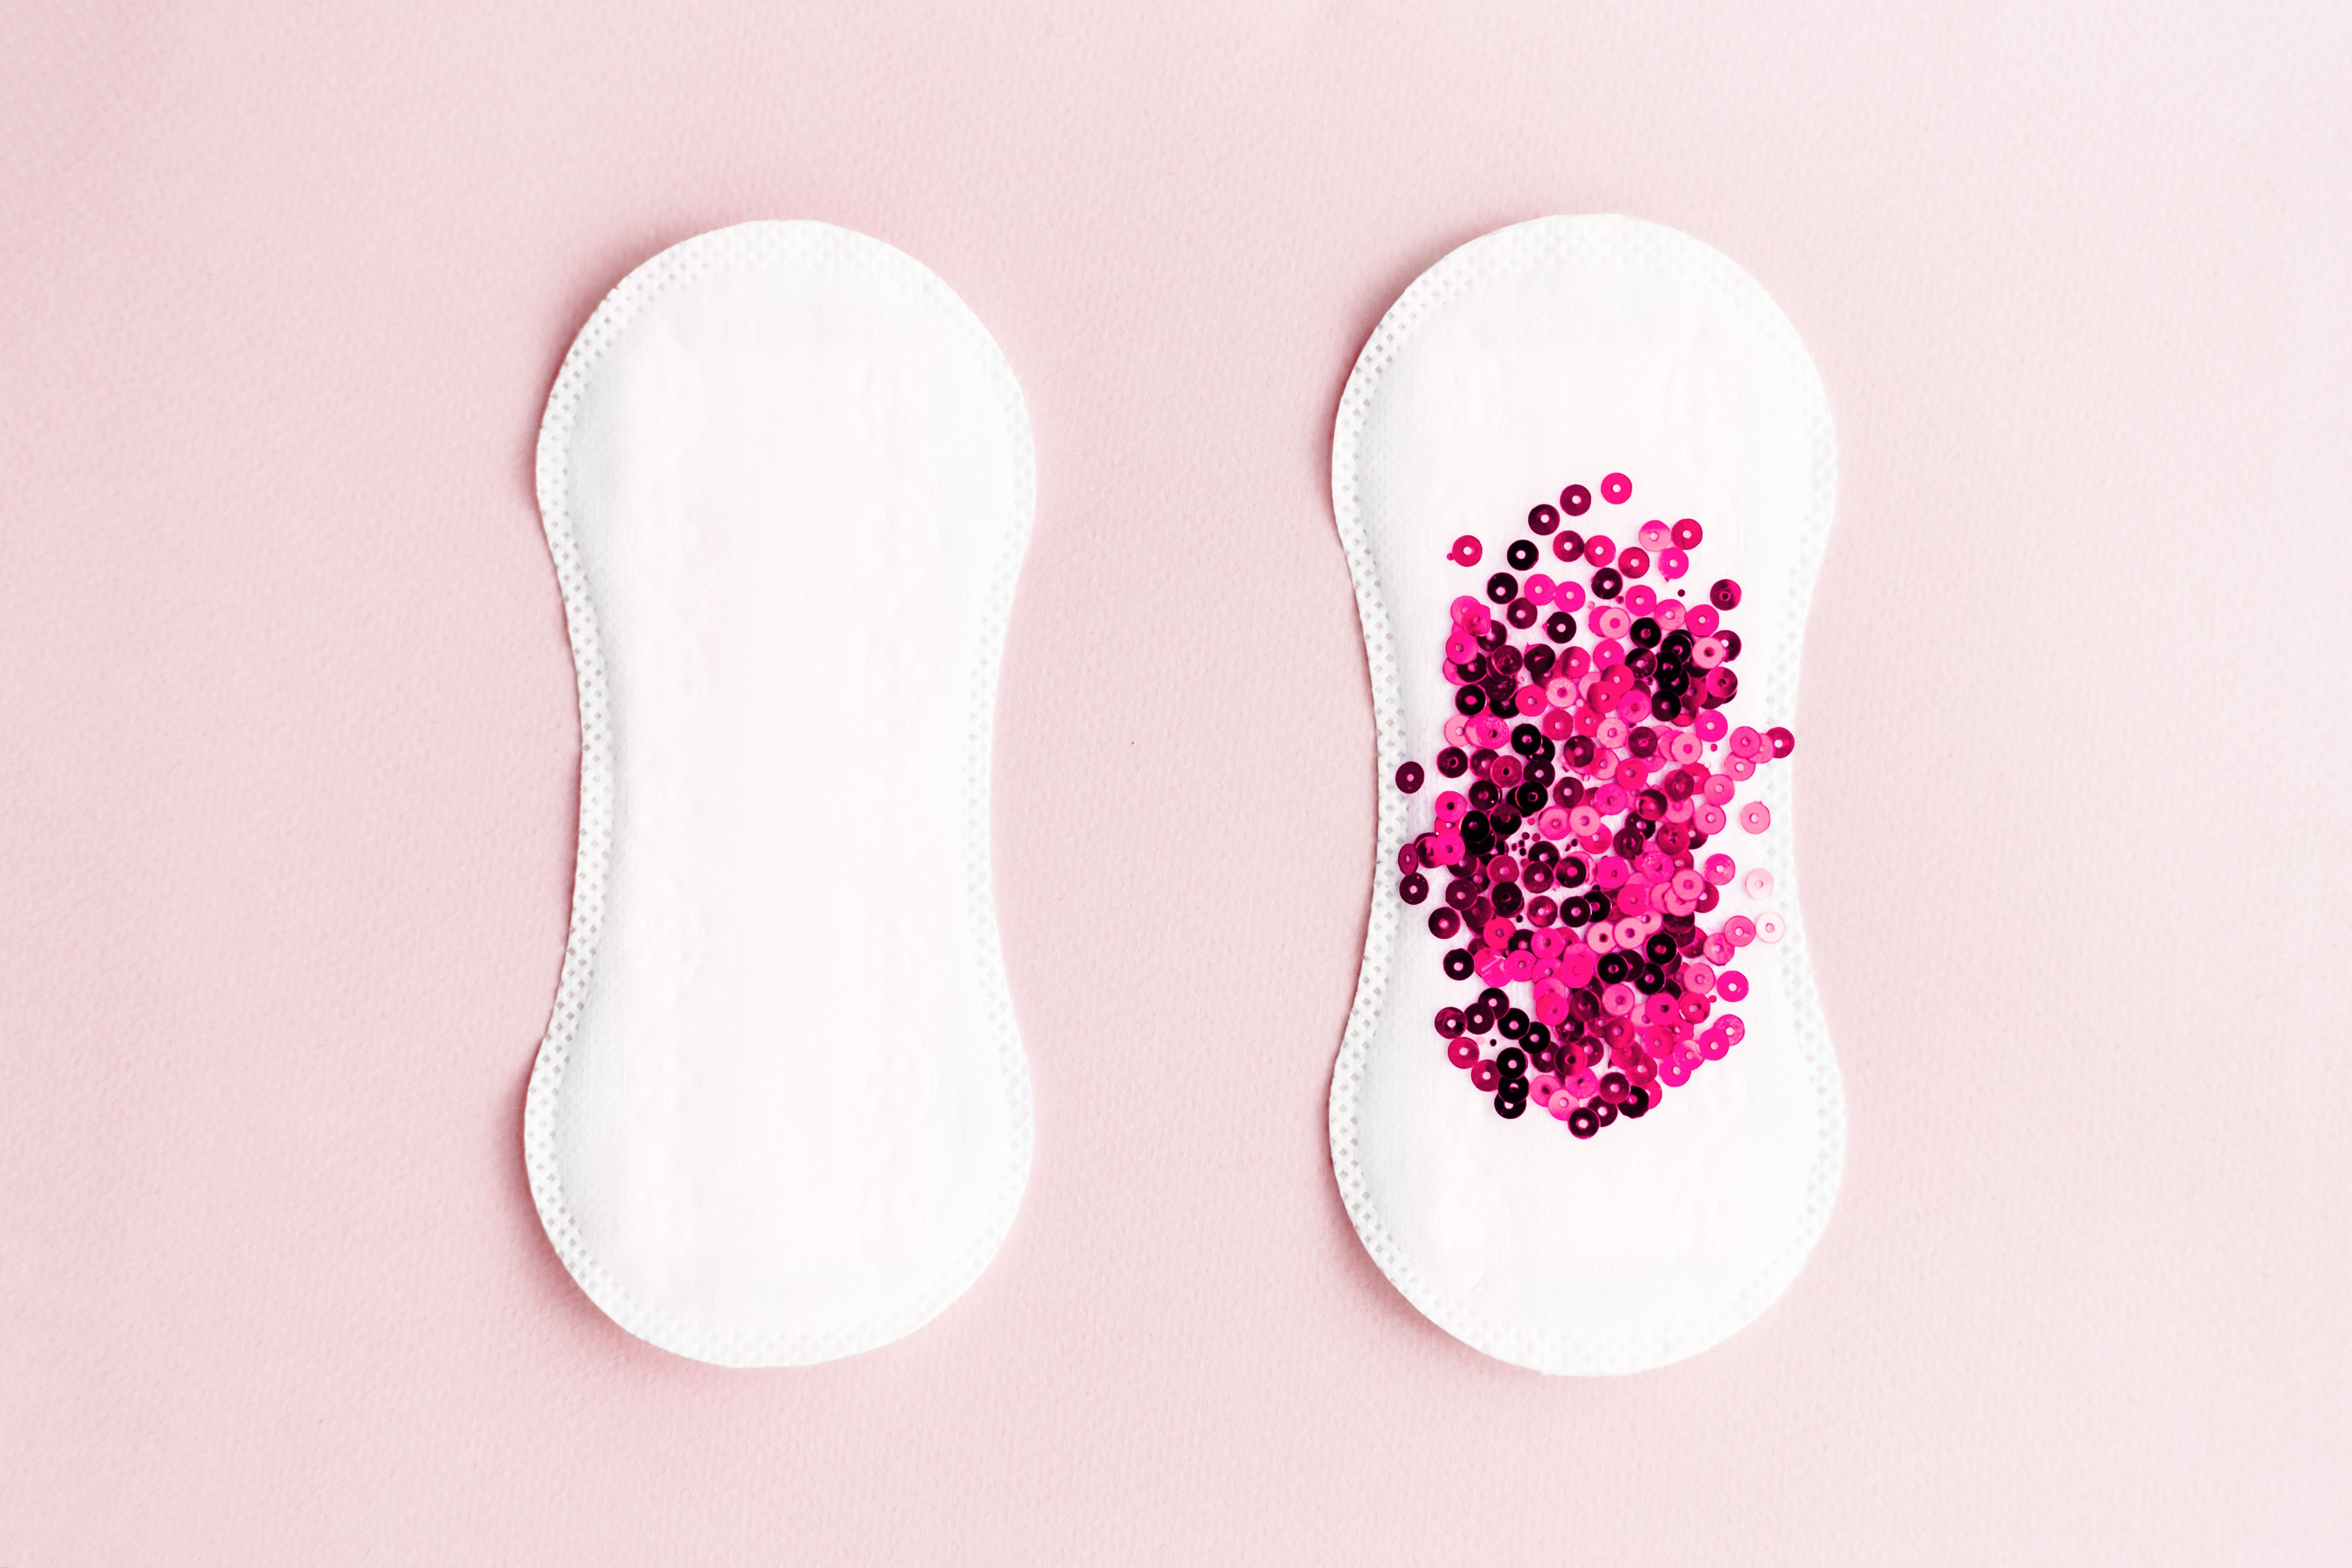 Does Your Period Stop In Water And Can You Swim Without A Tampon?